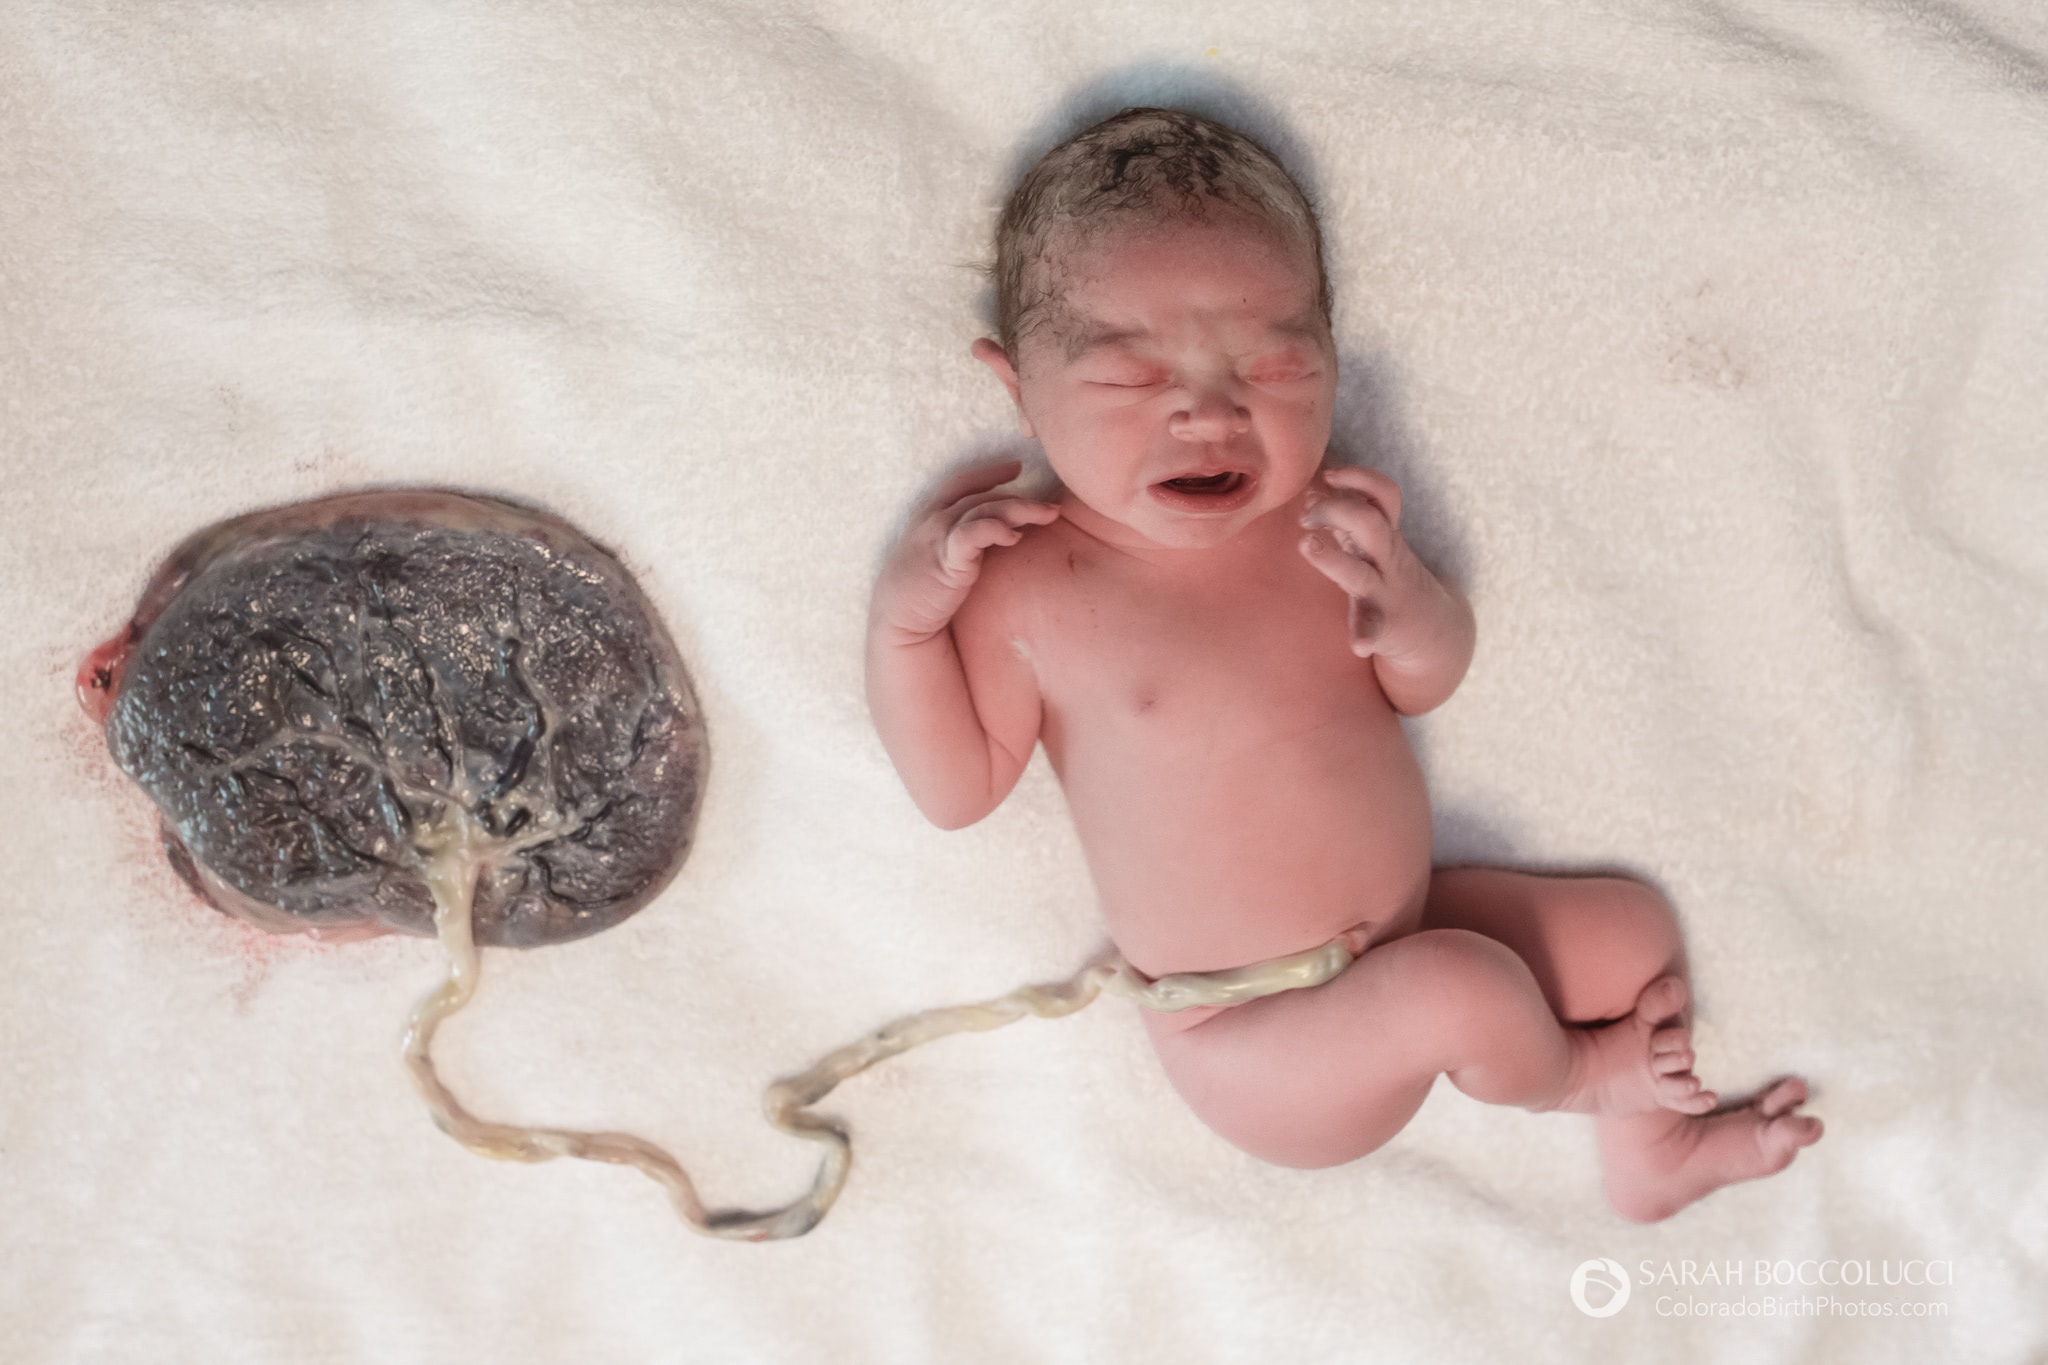 When Does Baby Placenta Develop?